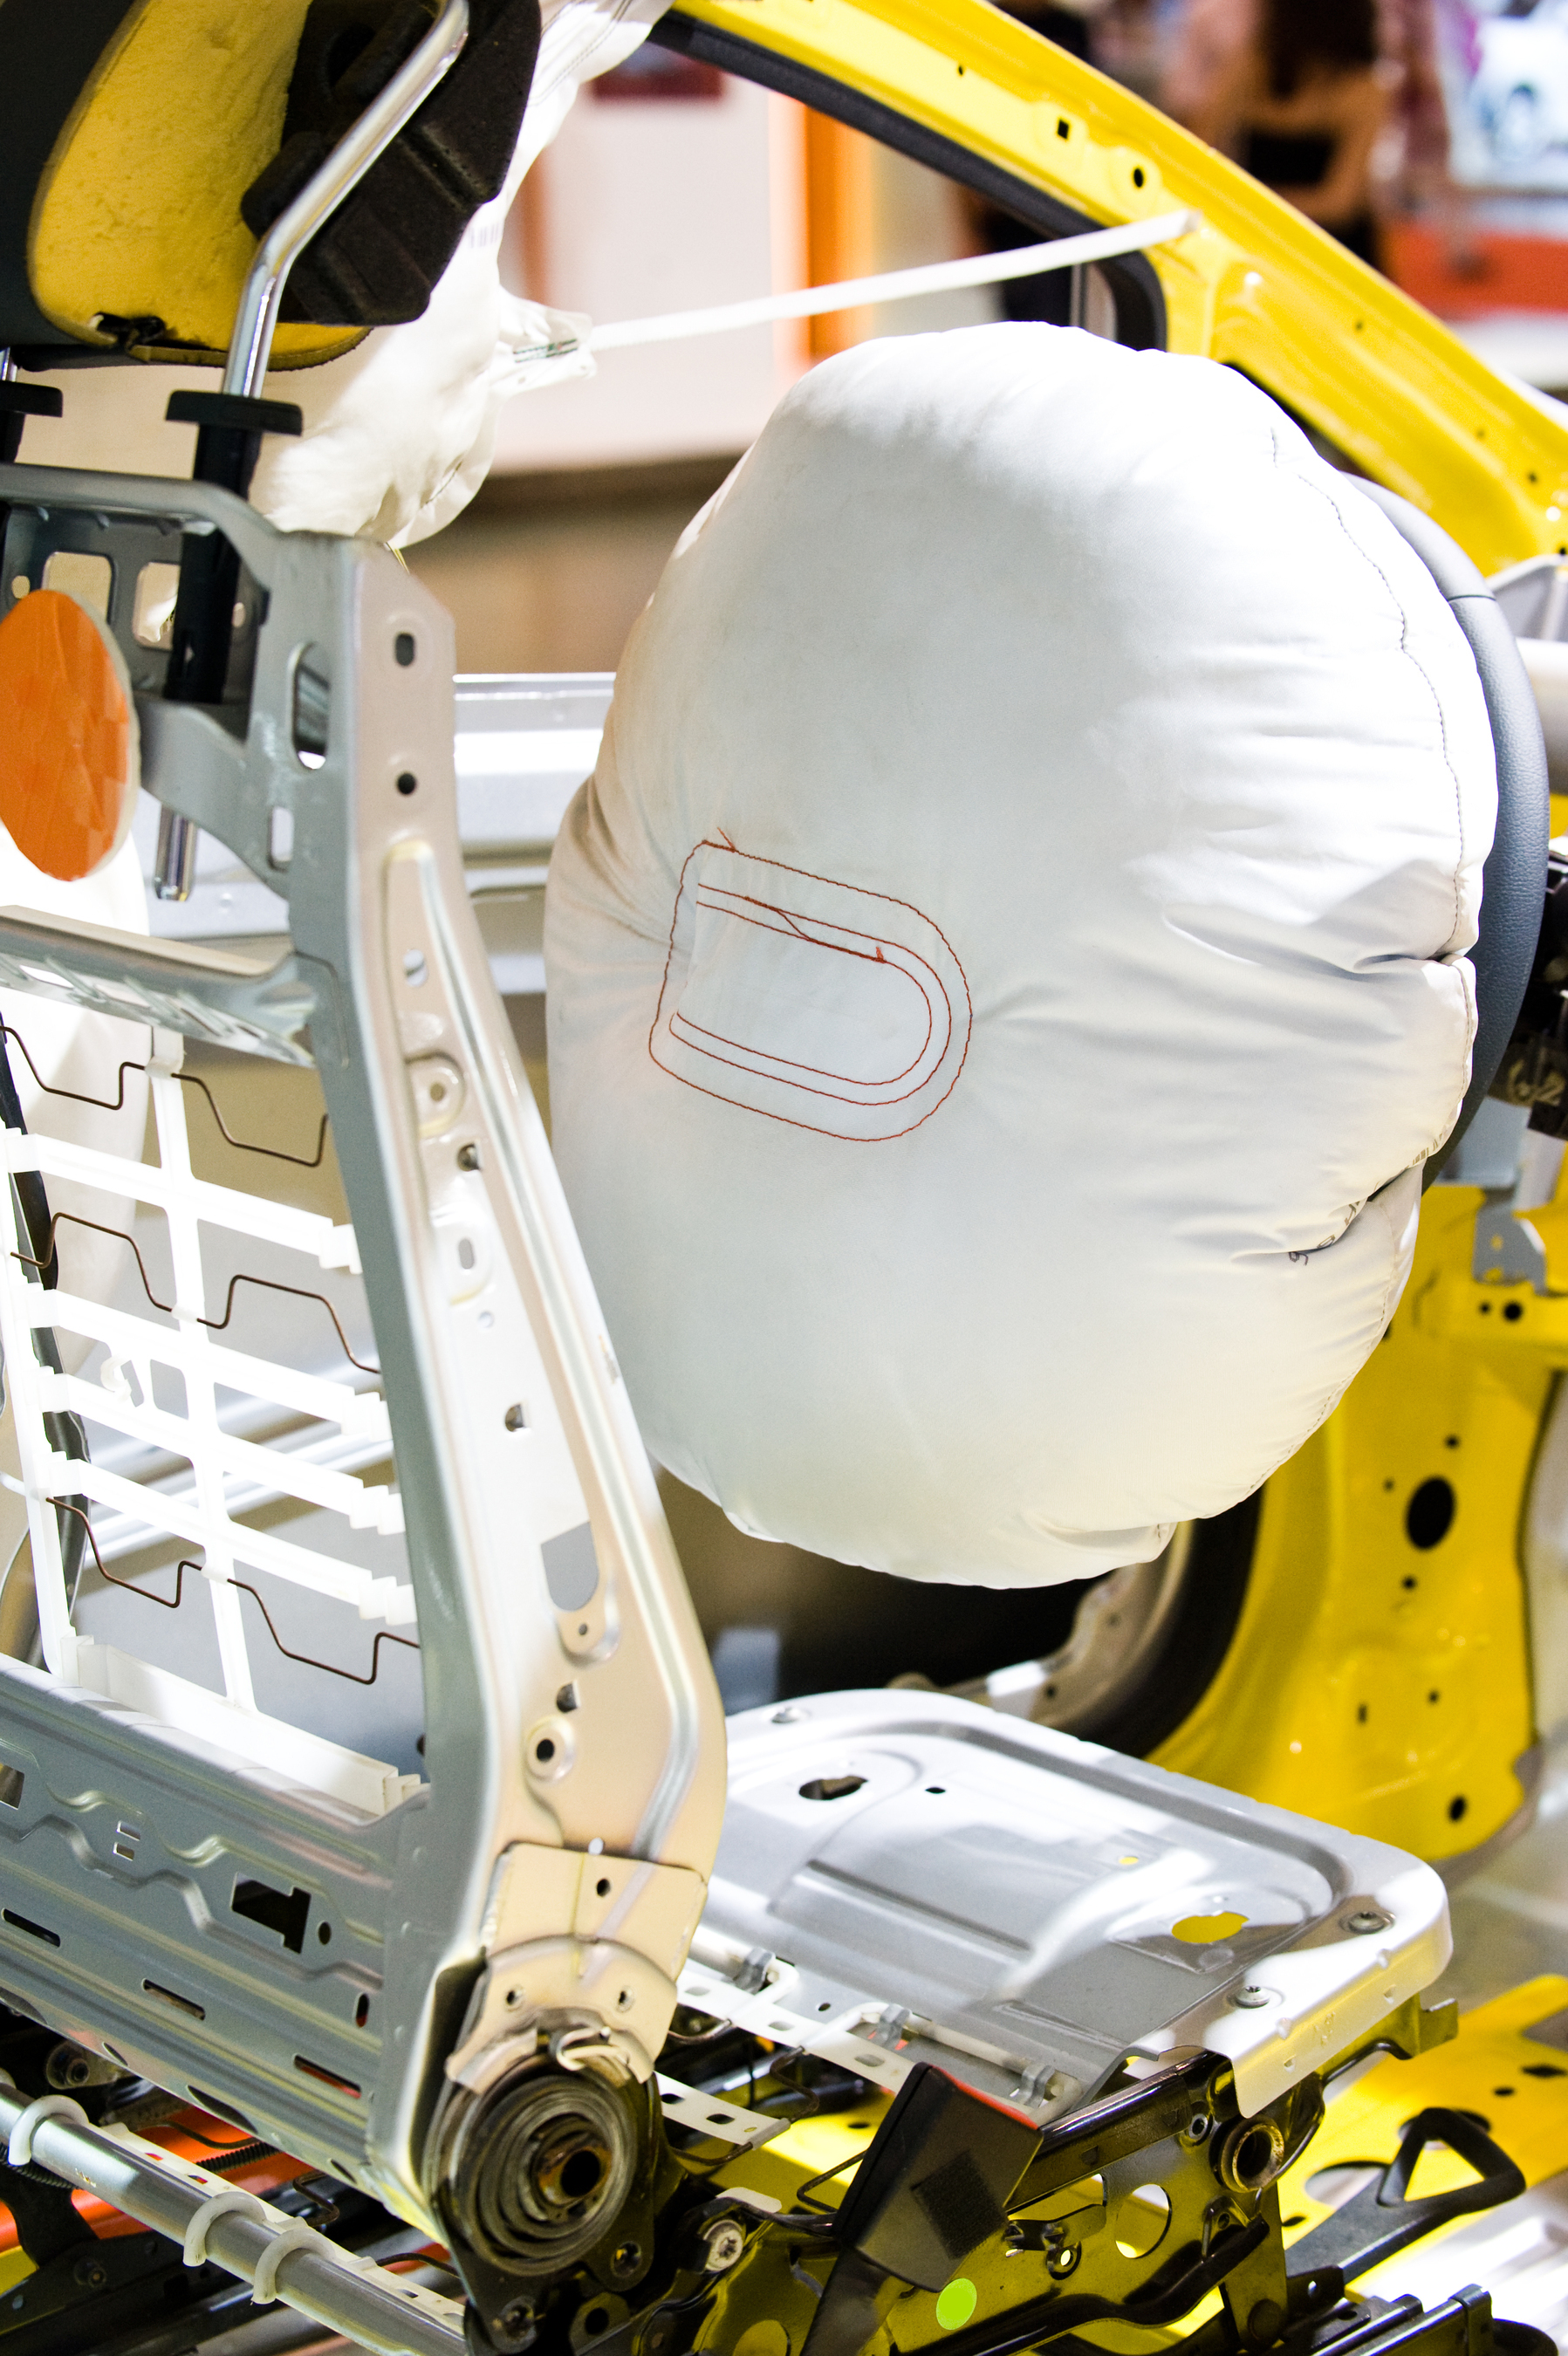 Airbags inflate in milliseconds (PRNewsFoto/INFICON)